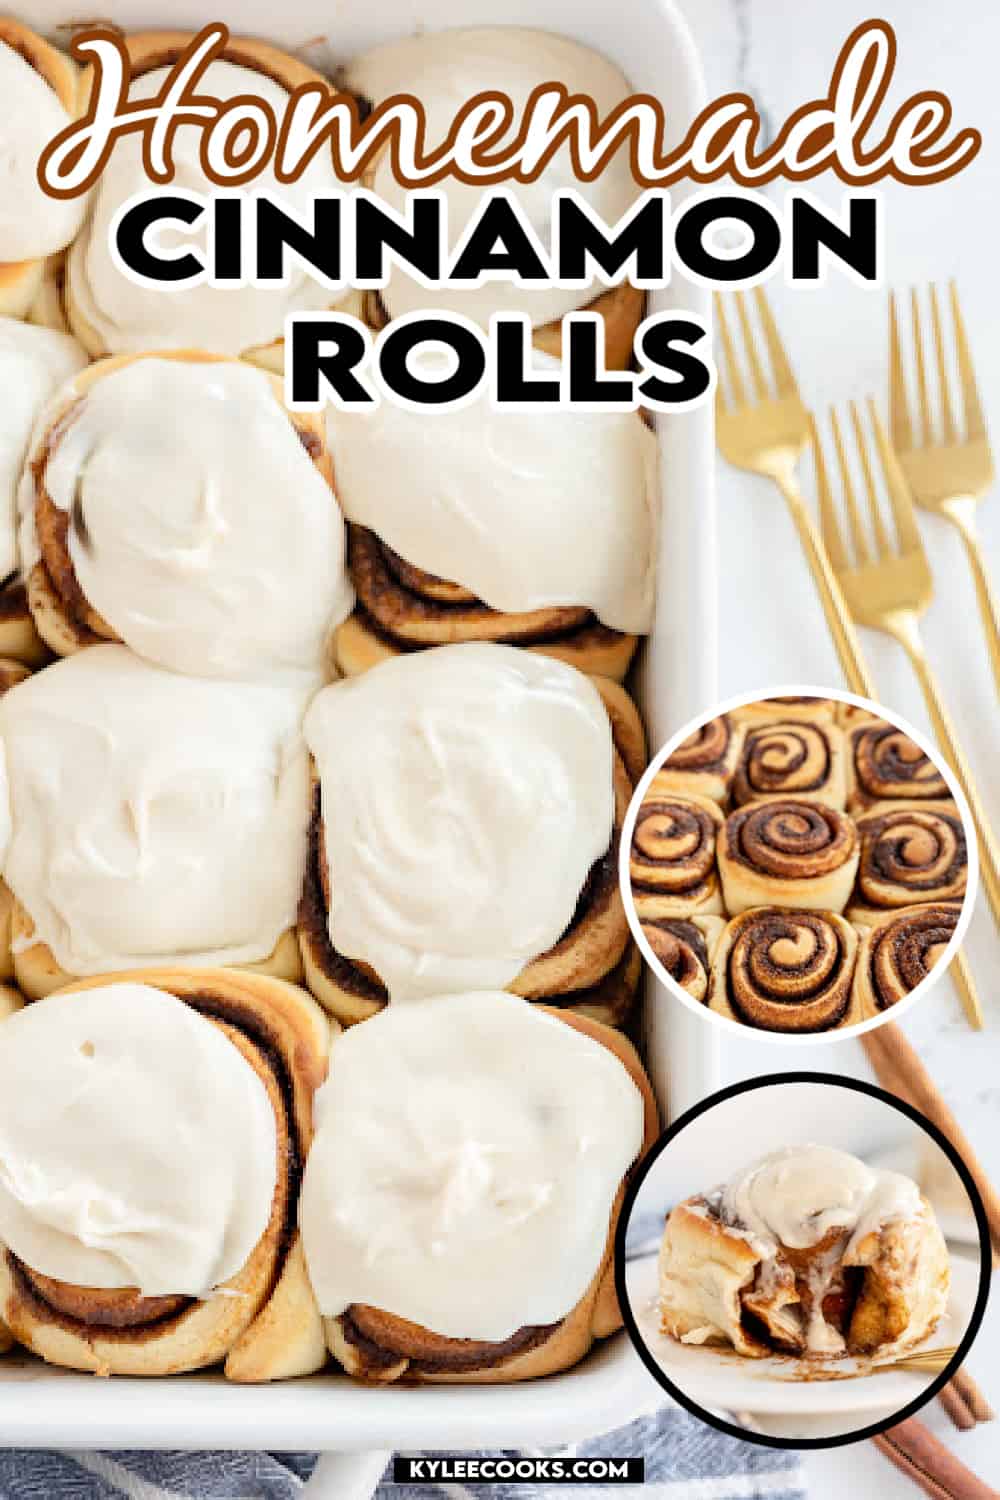 cinnamon rolls in a baking dish, with recipe name and title overlaid in text.